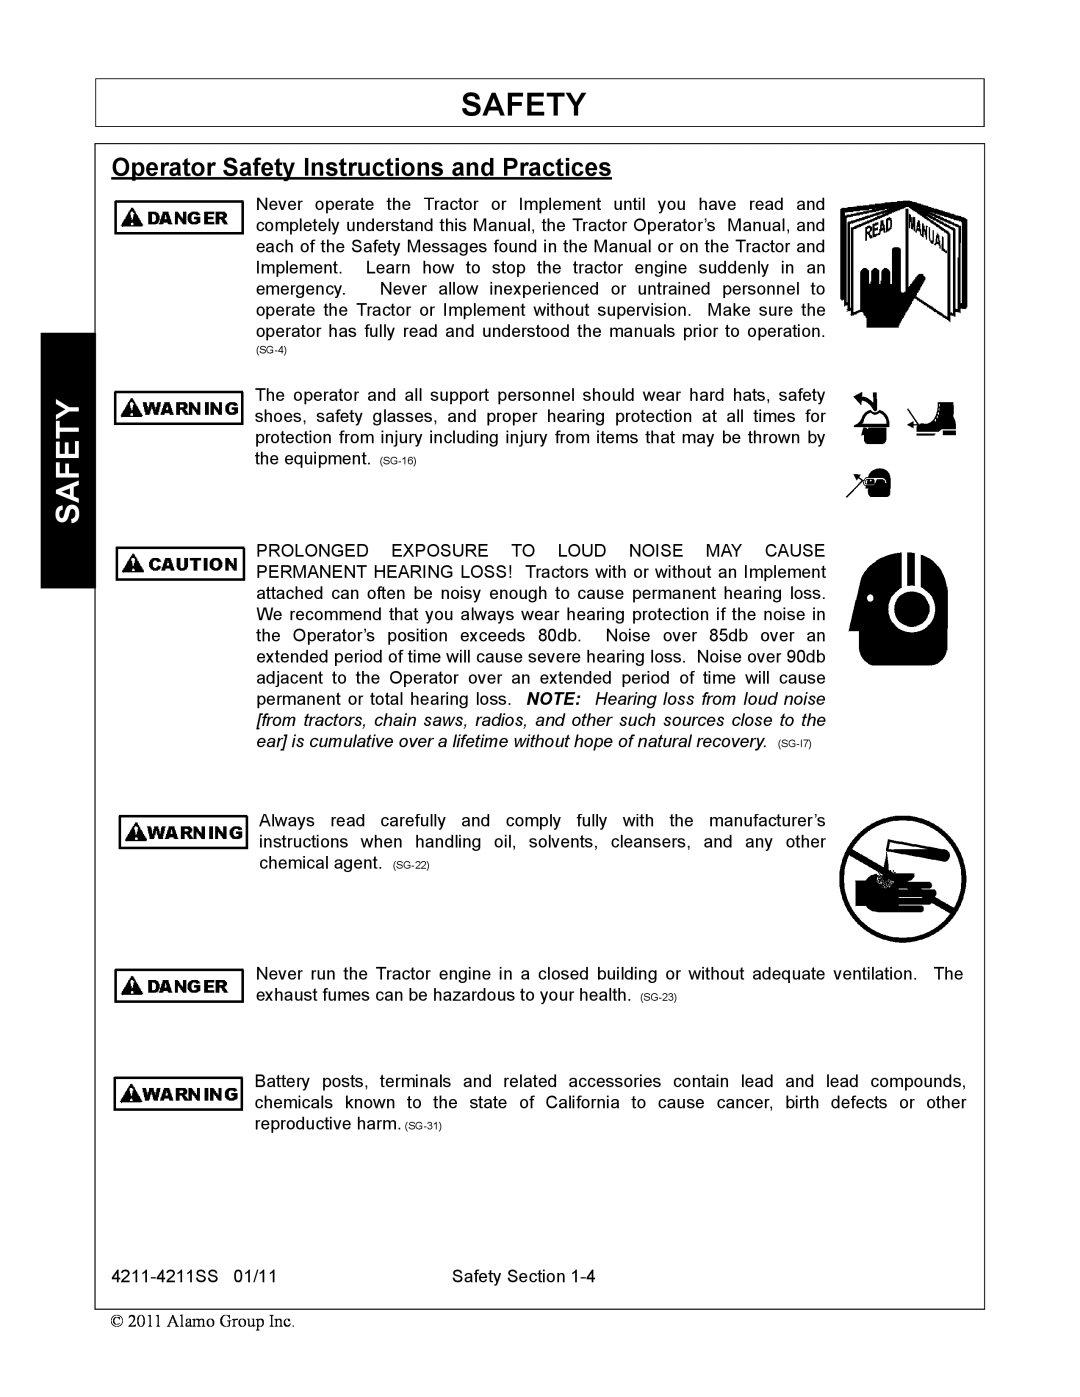 Servis-Rhino 4211SS manual Operator Safety Instructions and Practices, SG-4 